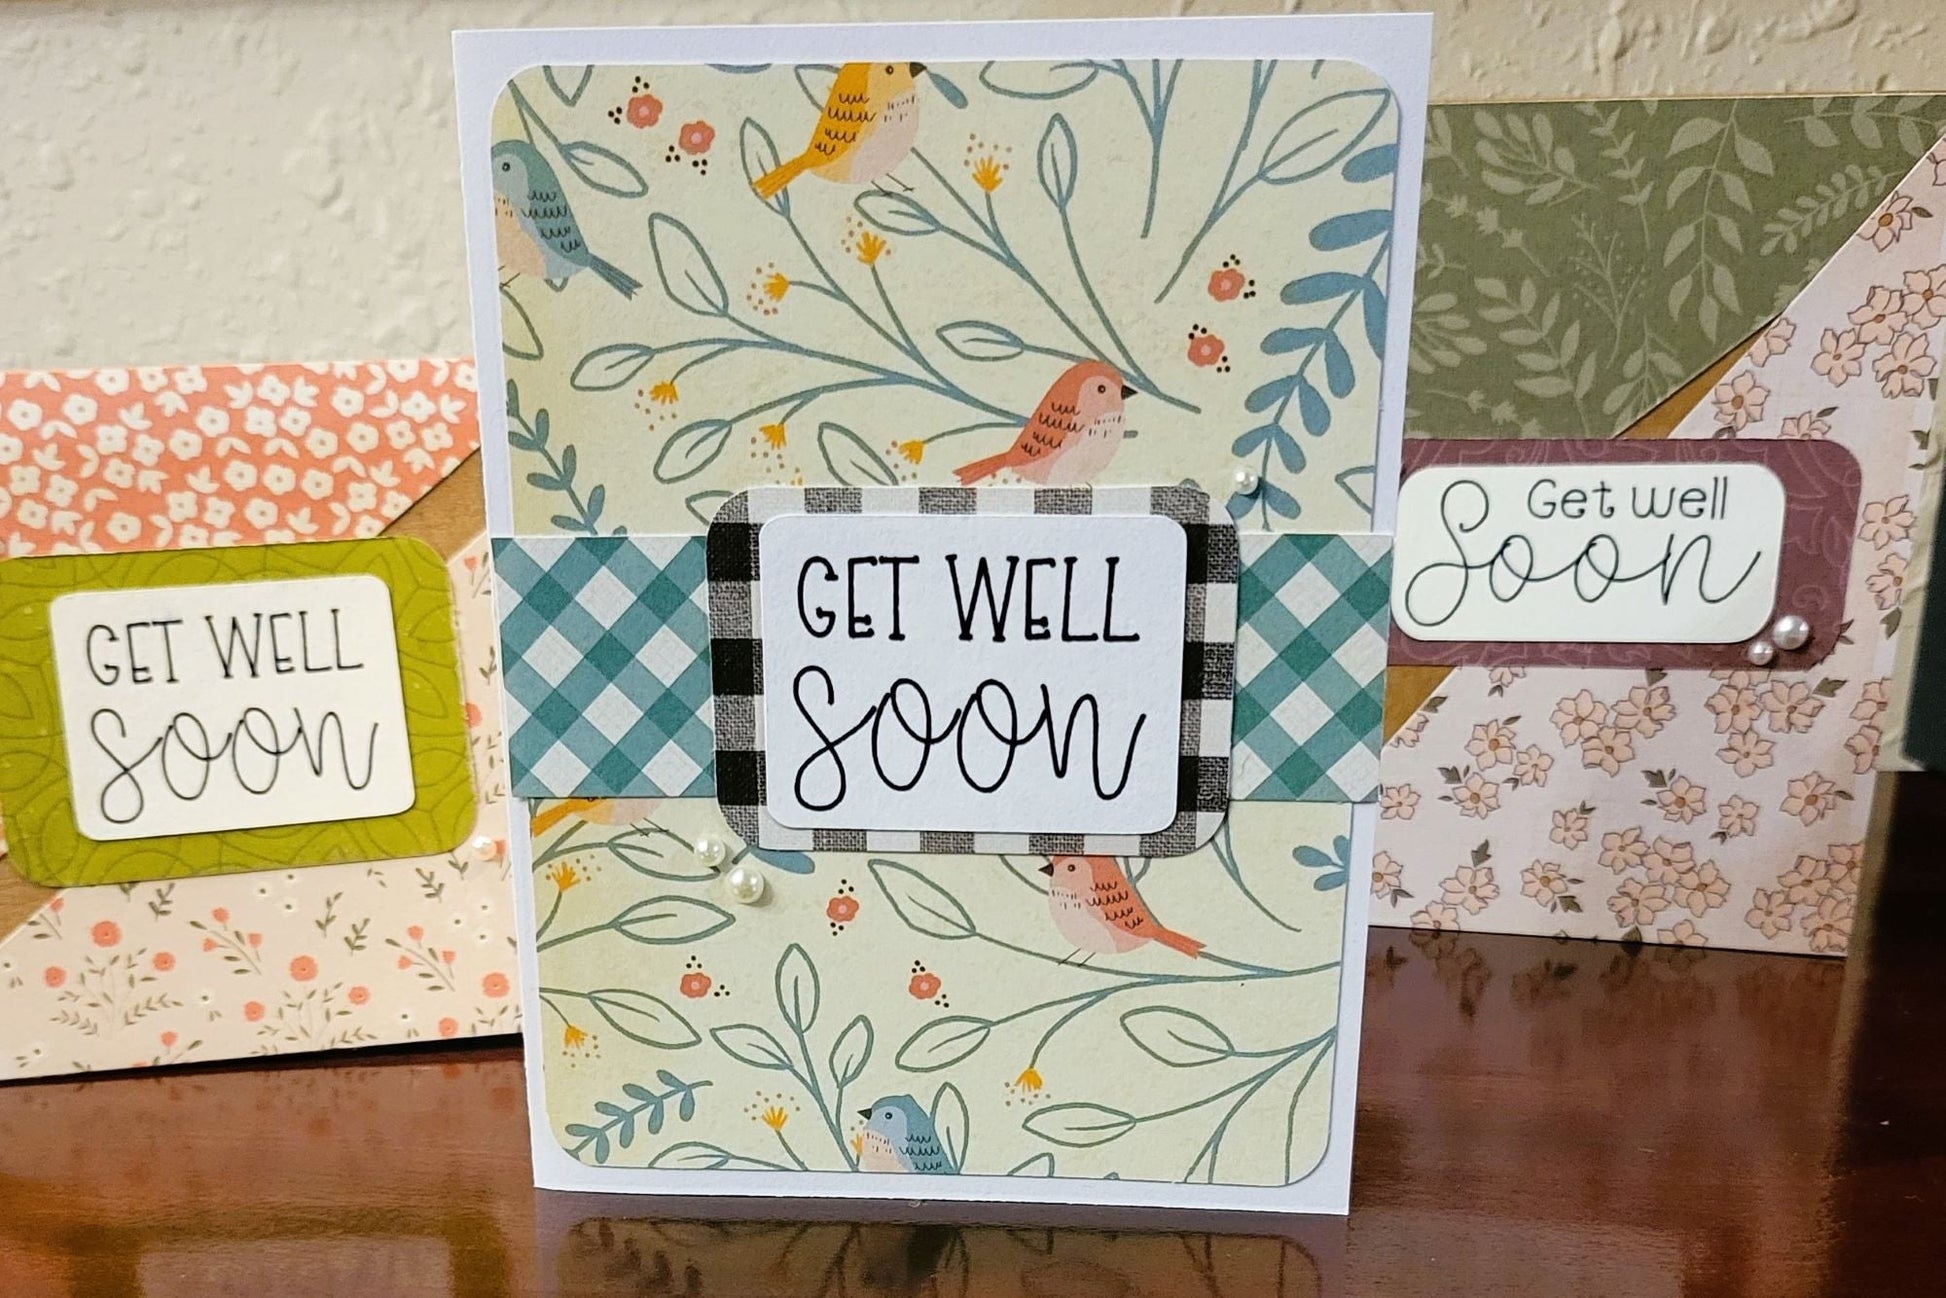 Get Well Soon, Plaids & Birdies v2 - Be Well Collection - Handmade Greeting Card - 31 Rubies Designs